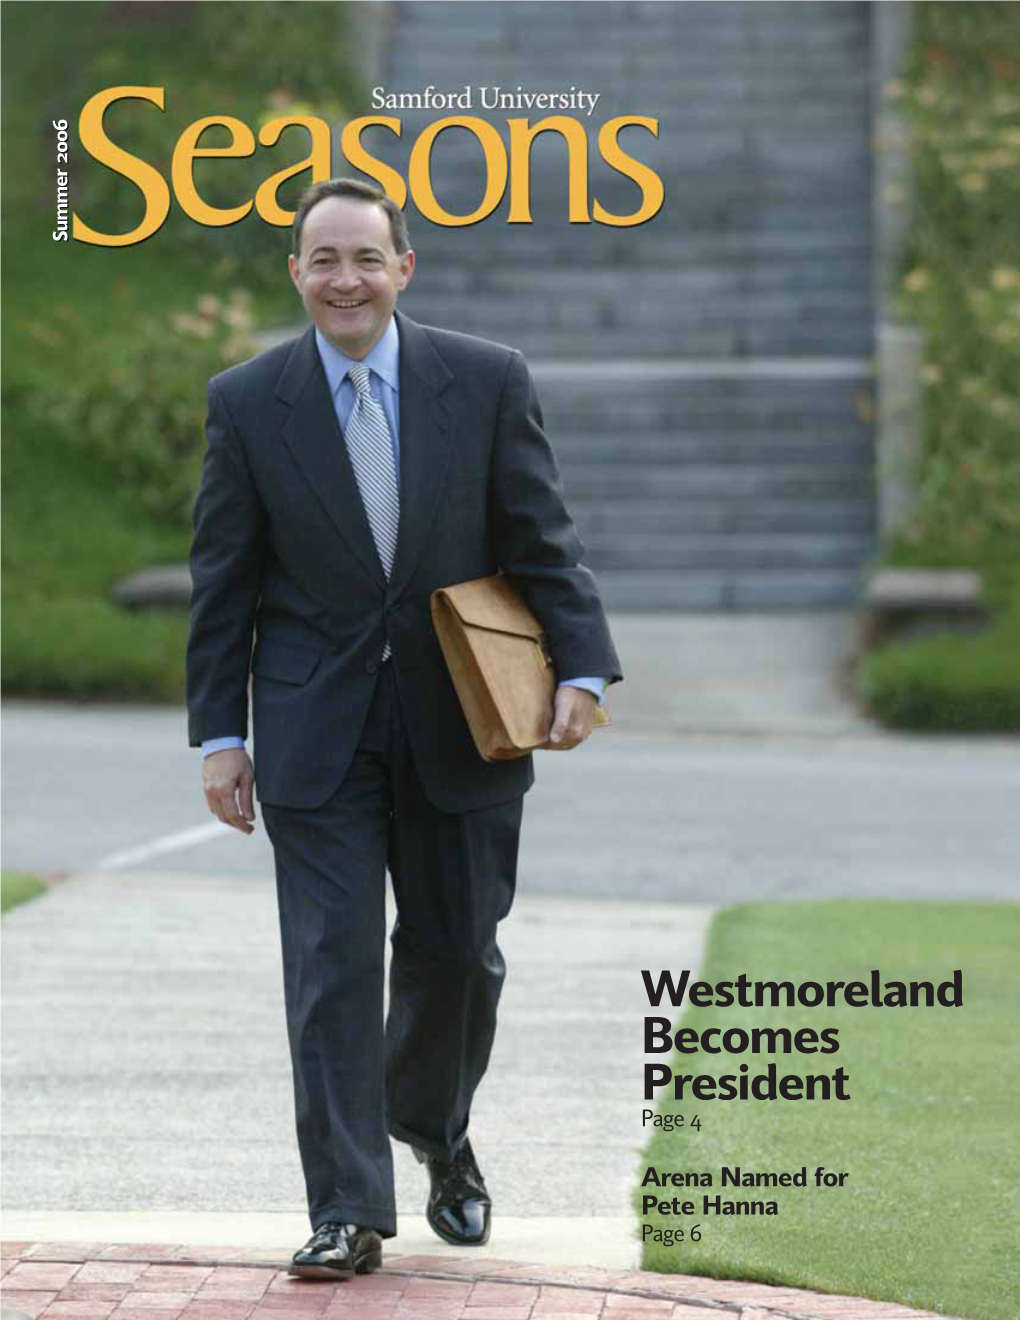 Westmoreland Becomes President